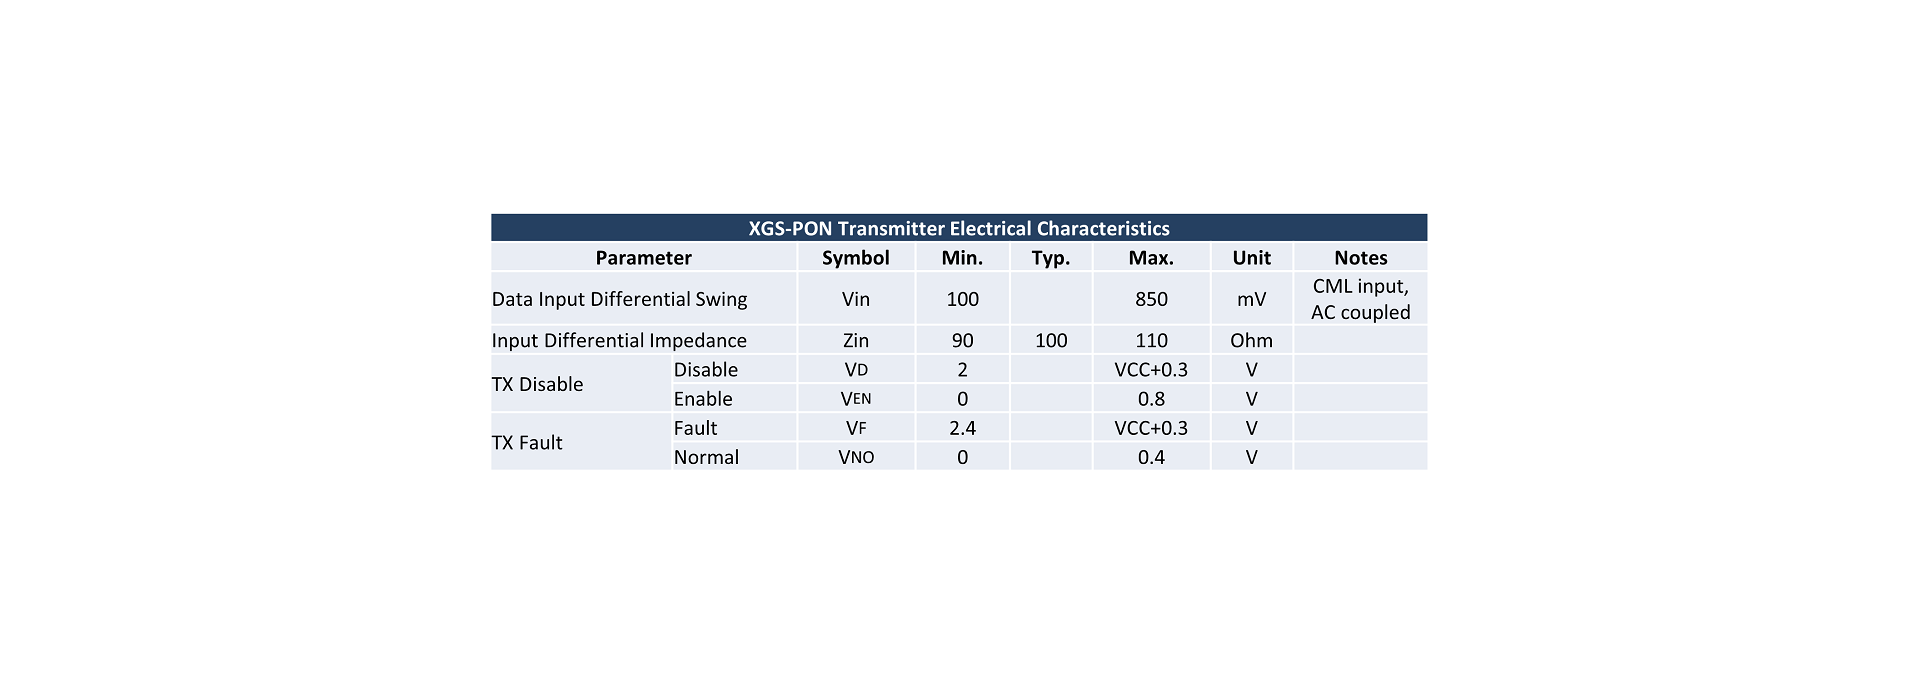 XGS-PON Transmitter Electrical Characteristics